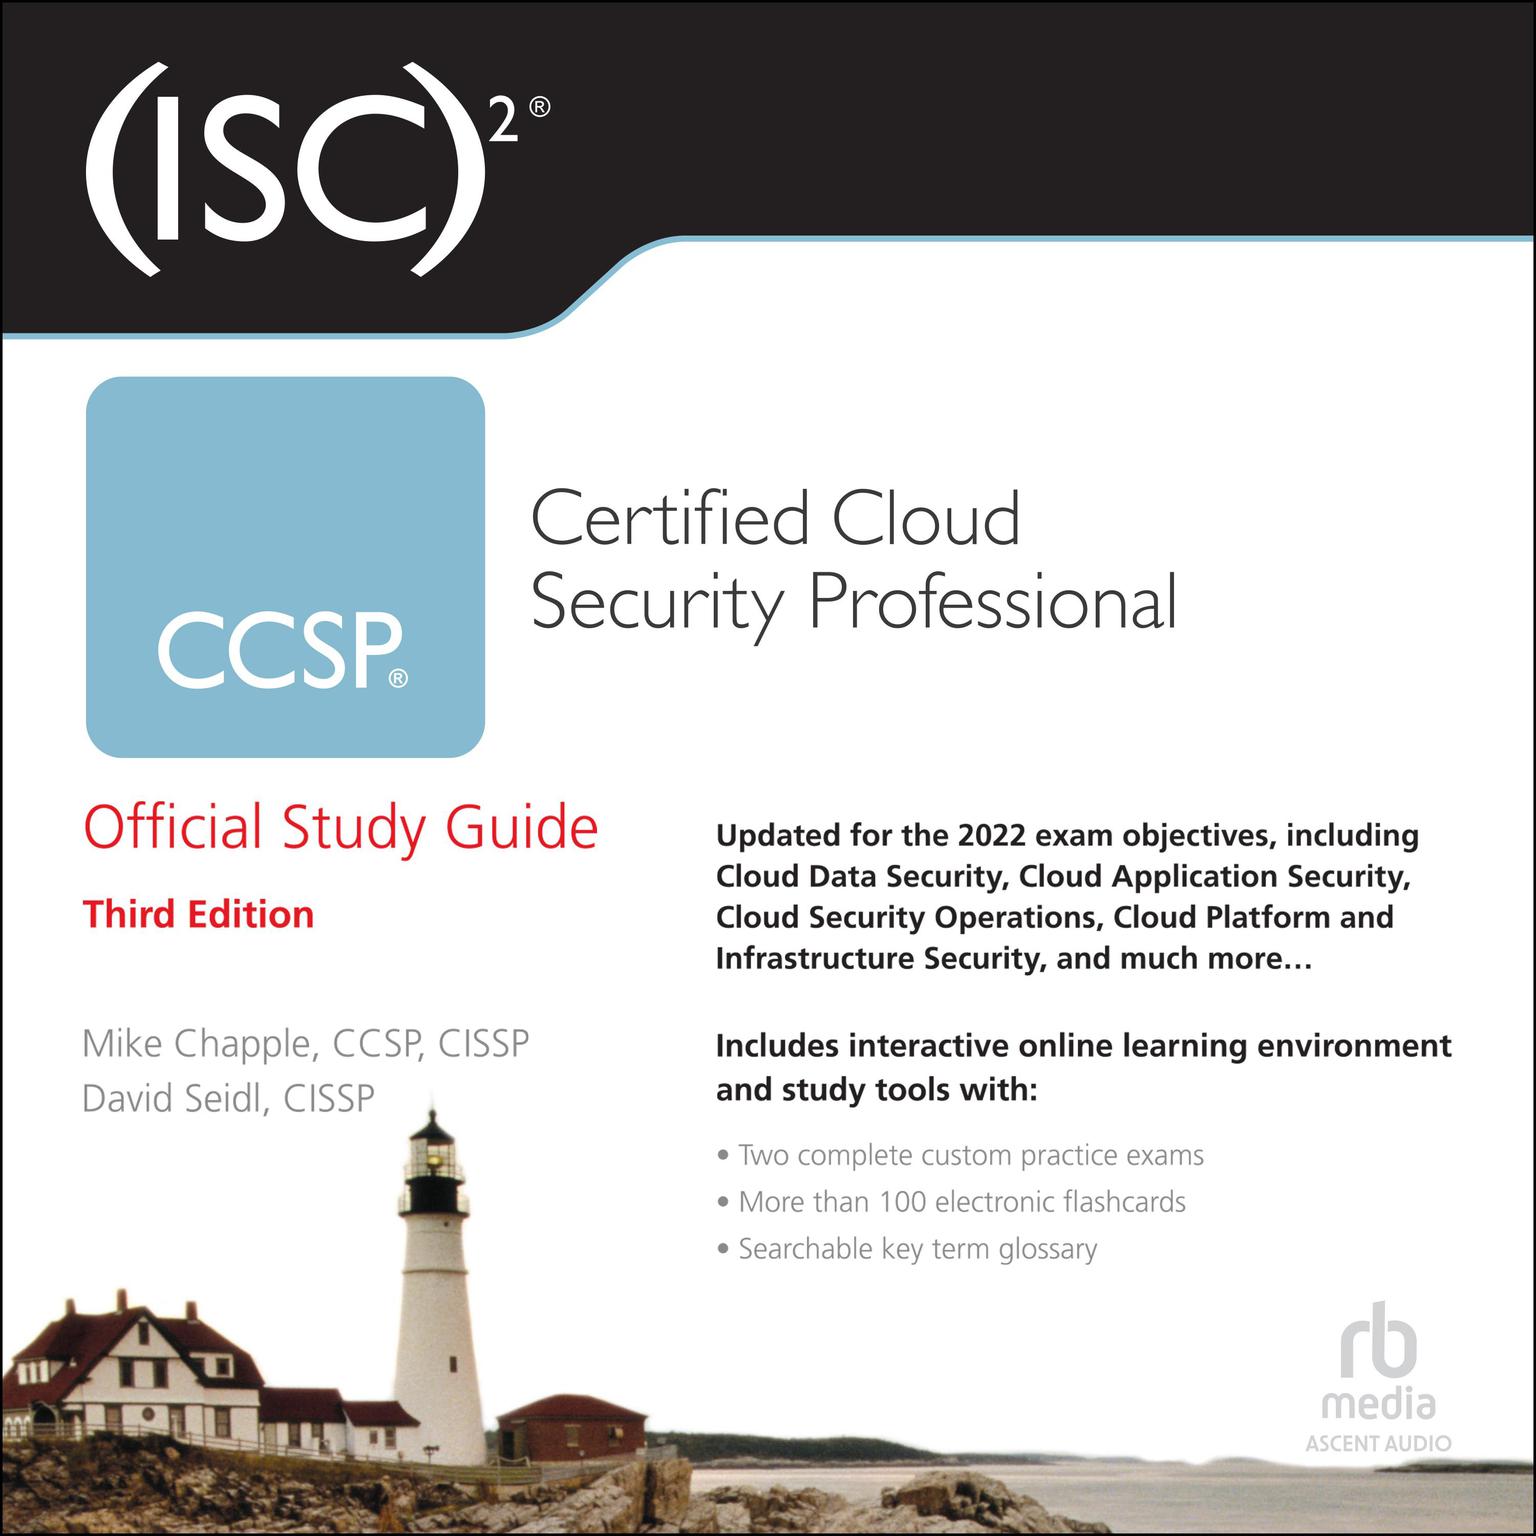 (ISC)2 CCSP Certified Cloud Security Professional Official Study Guide, 3rd Edition Audiobook, by Mike Chapple